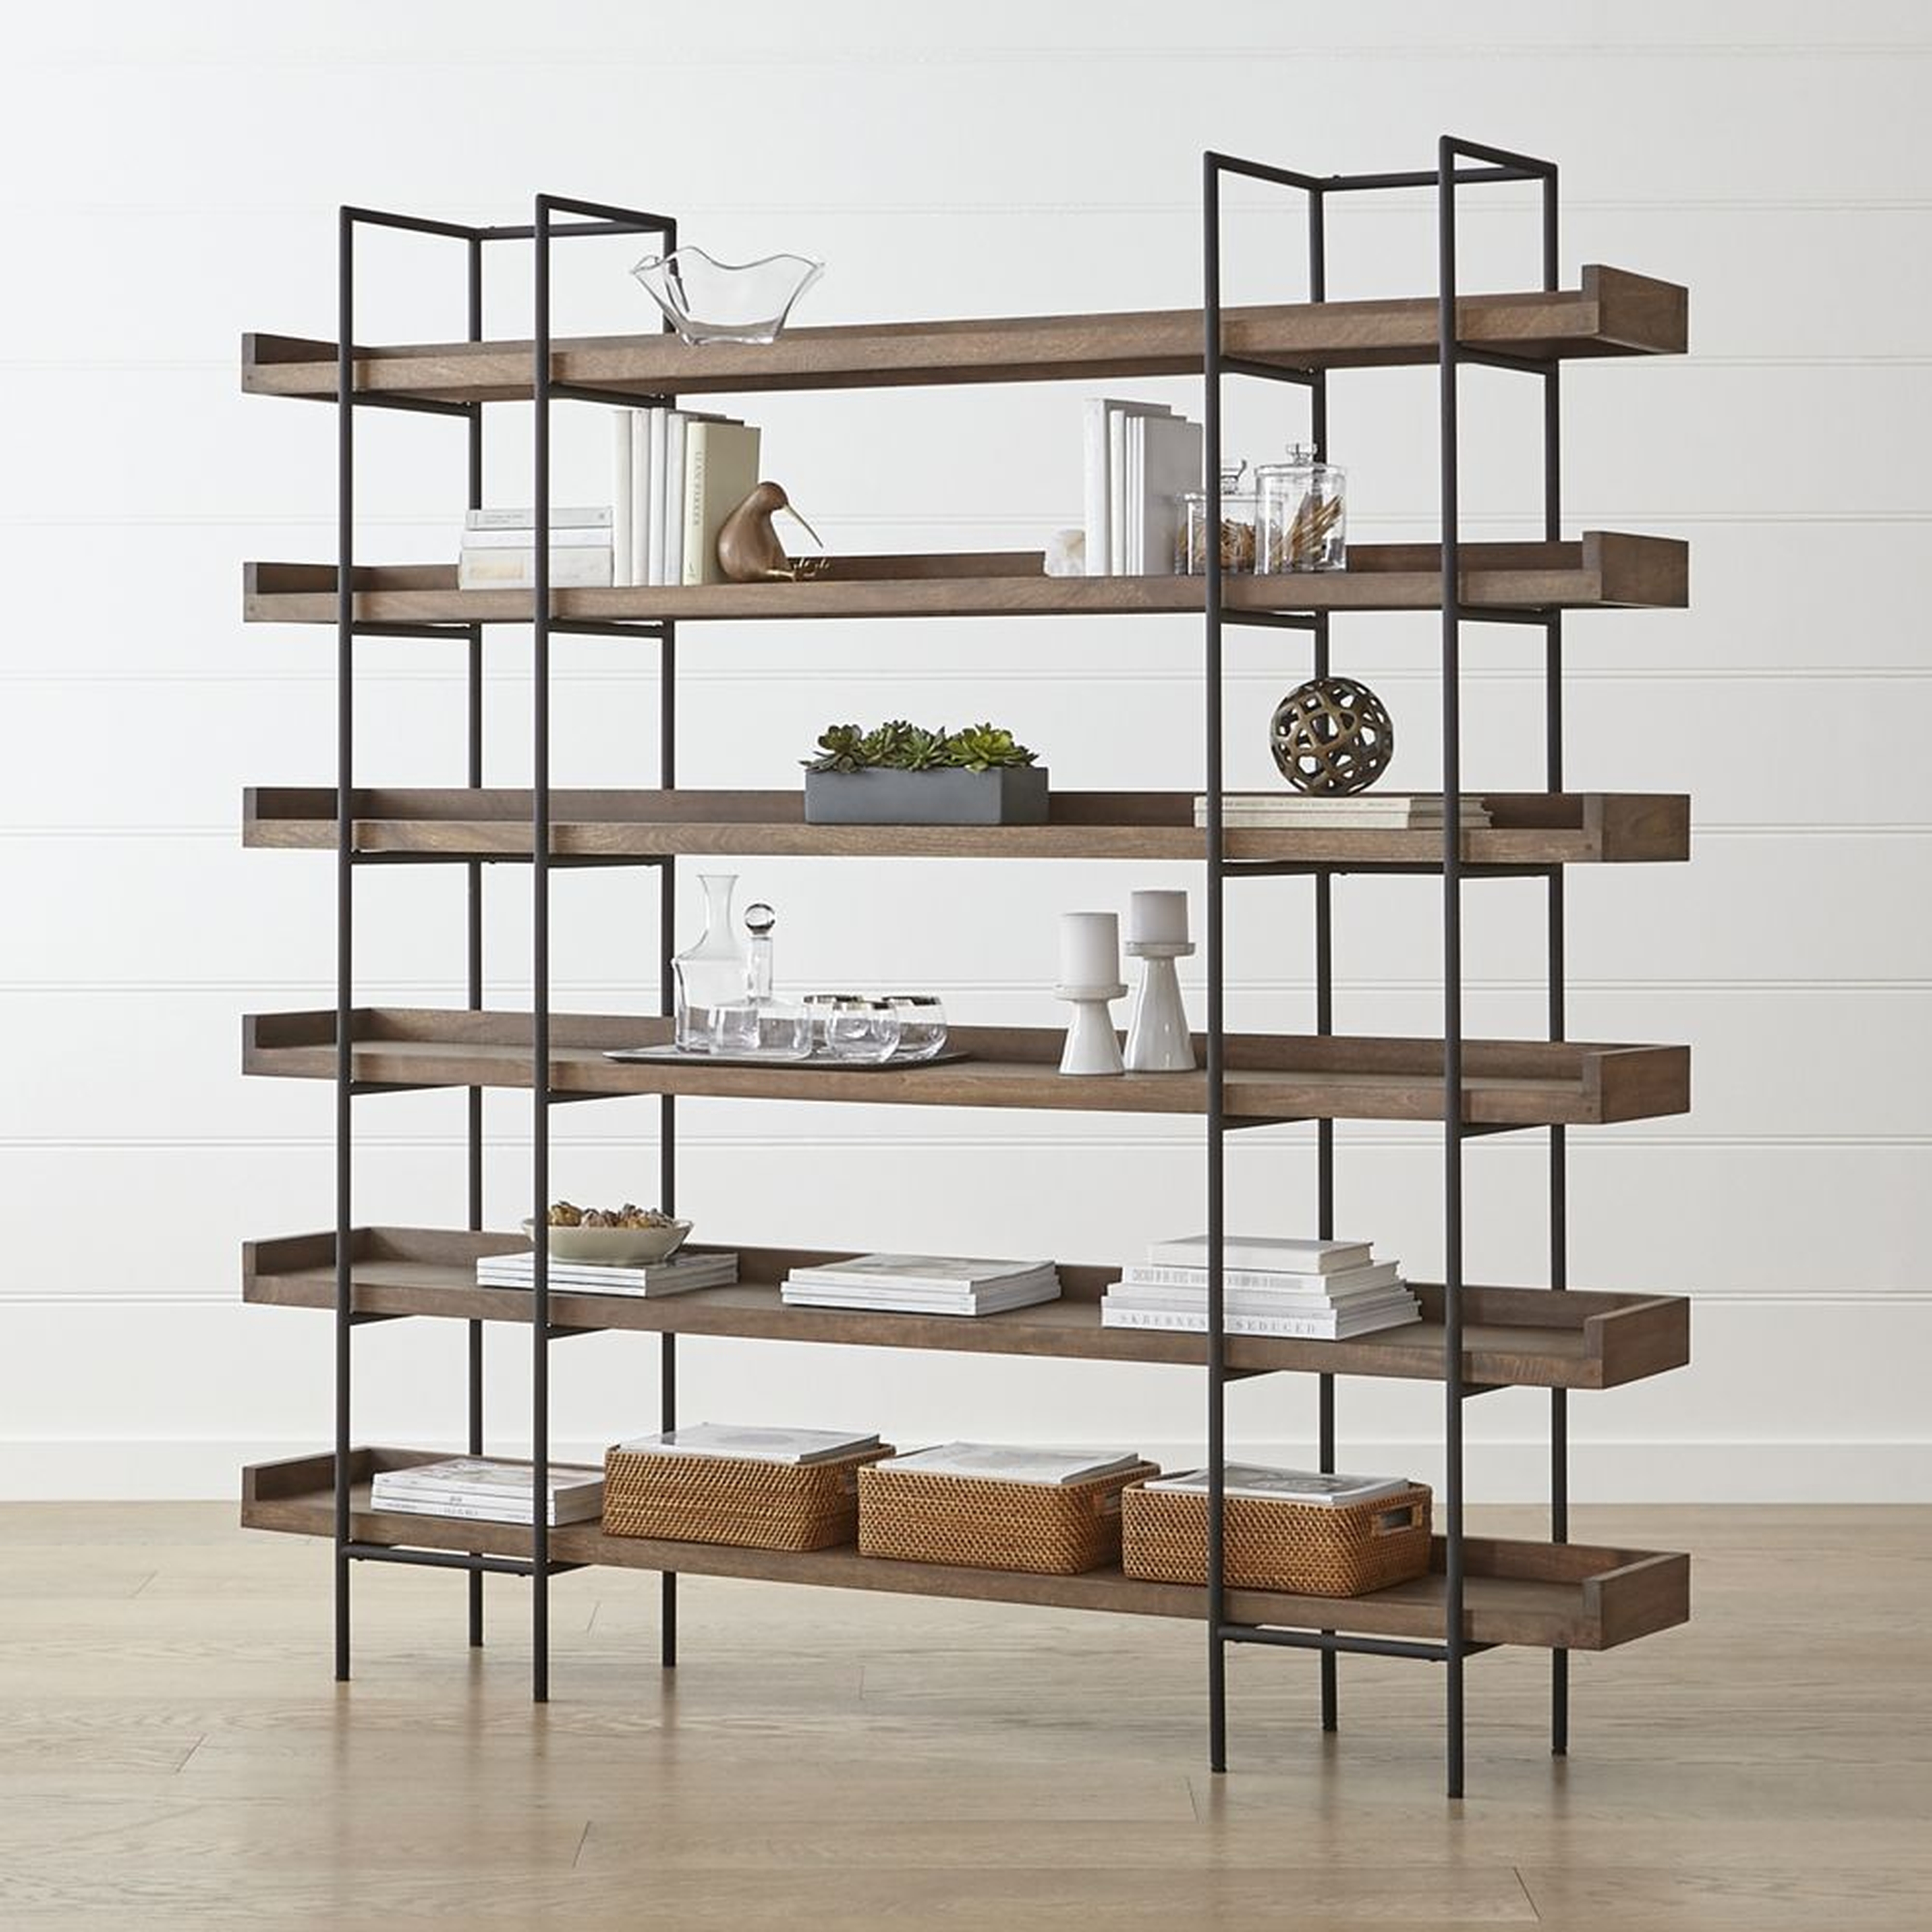 Beckett Grey Wash 6-High Shelf RESTOCK in early september 2022 - Crate and Barrel